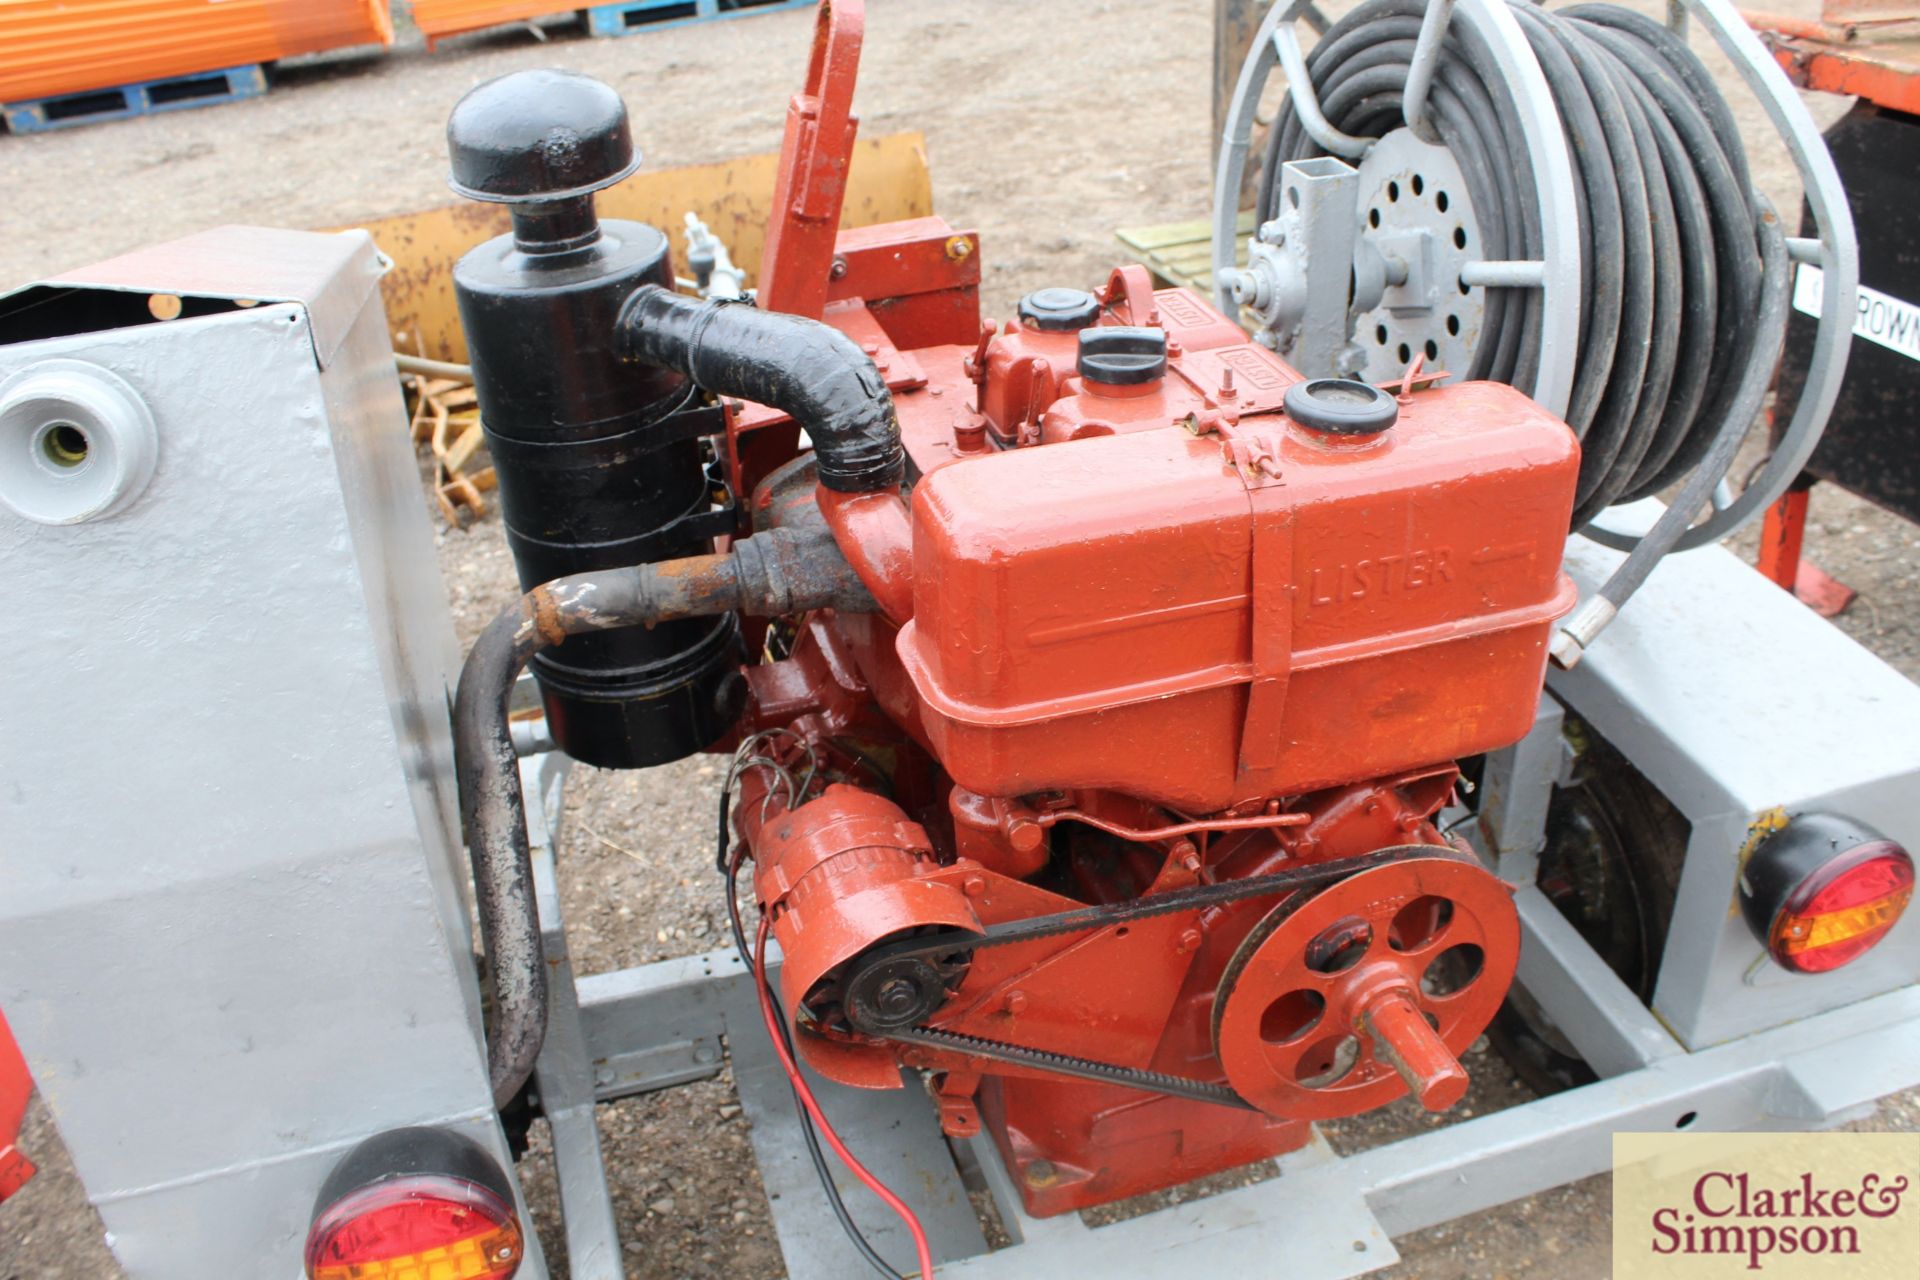 Harben fast tow high pressure drain jetter. With Lister diesel engine. - Image 8 of 8